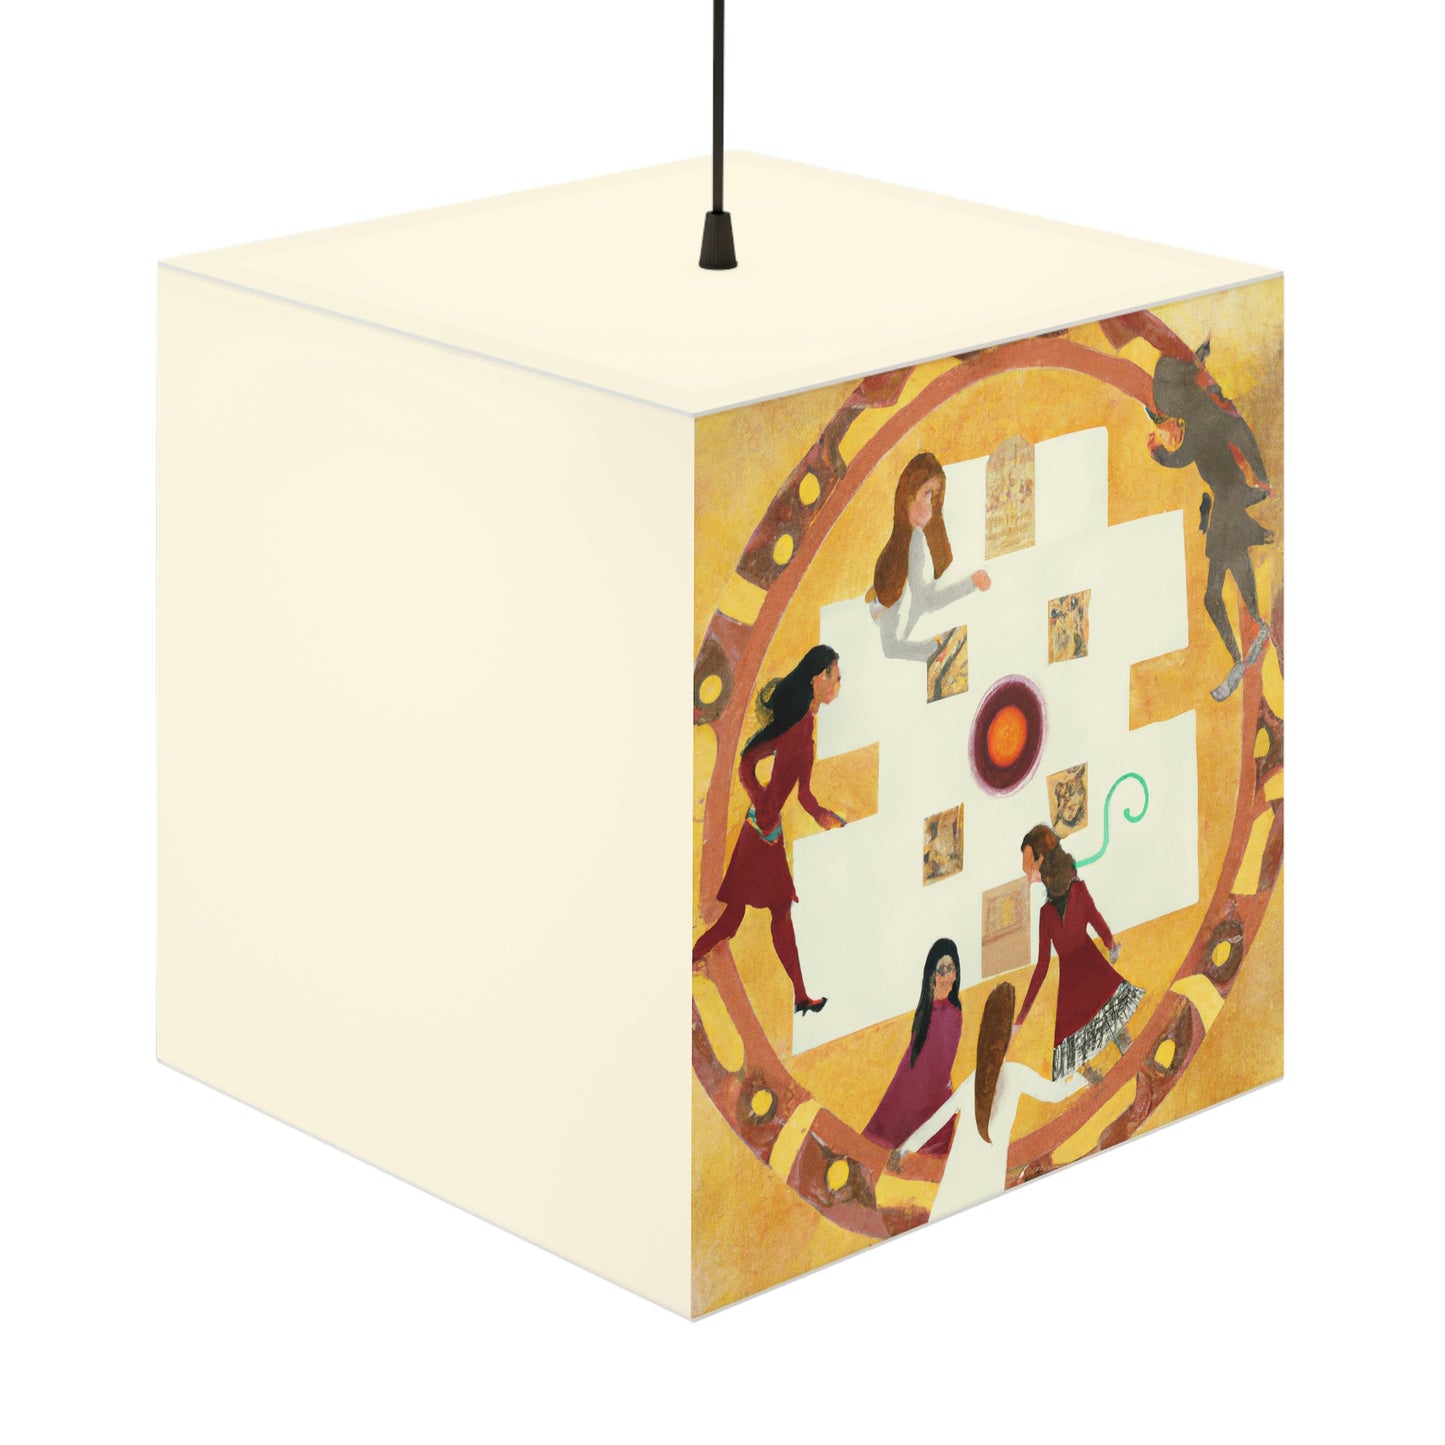 The Castle Caper: A Battle of Wits and Adventure - The Alien Light Cube Lamp